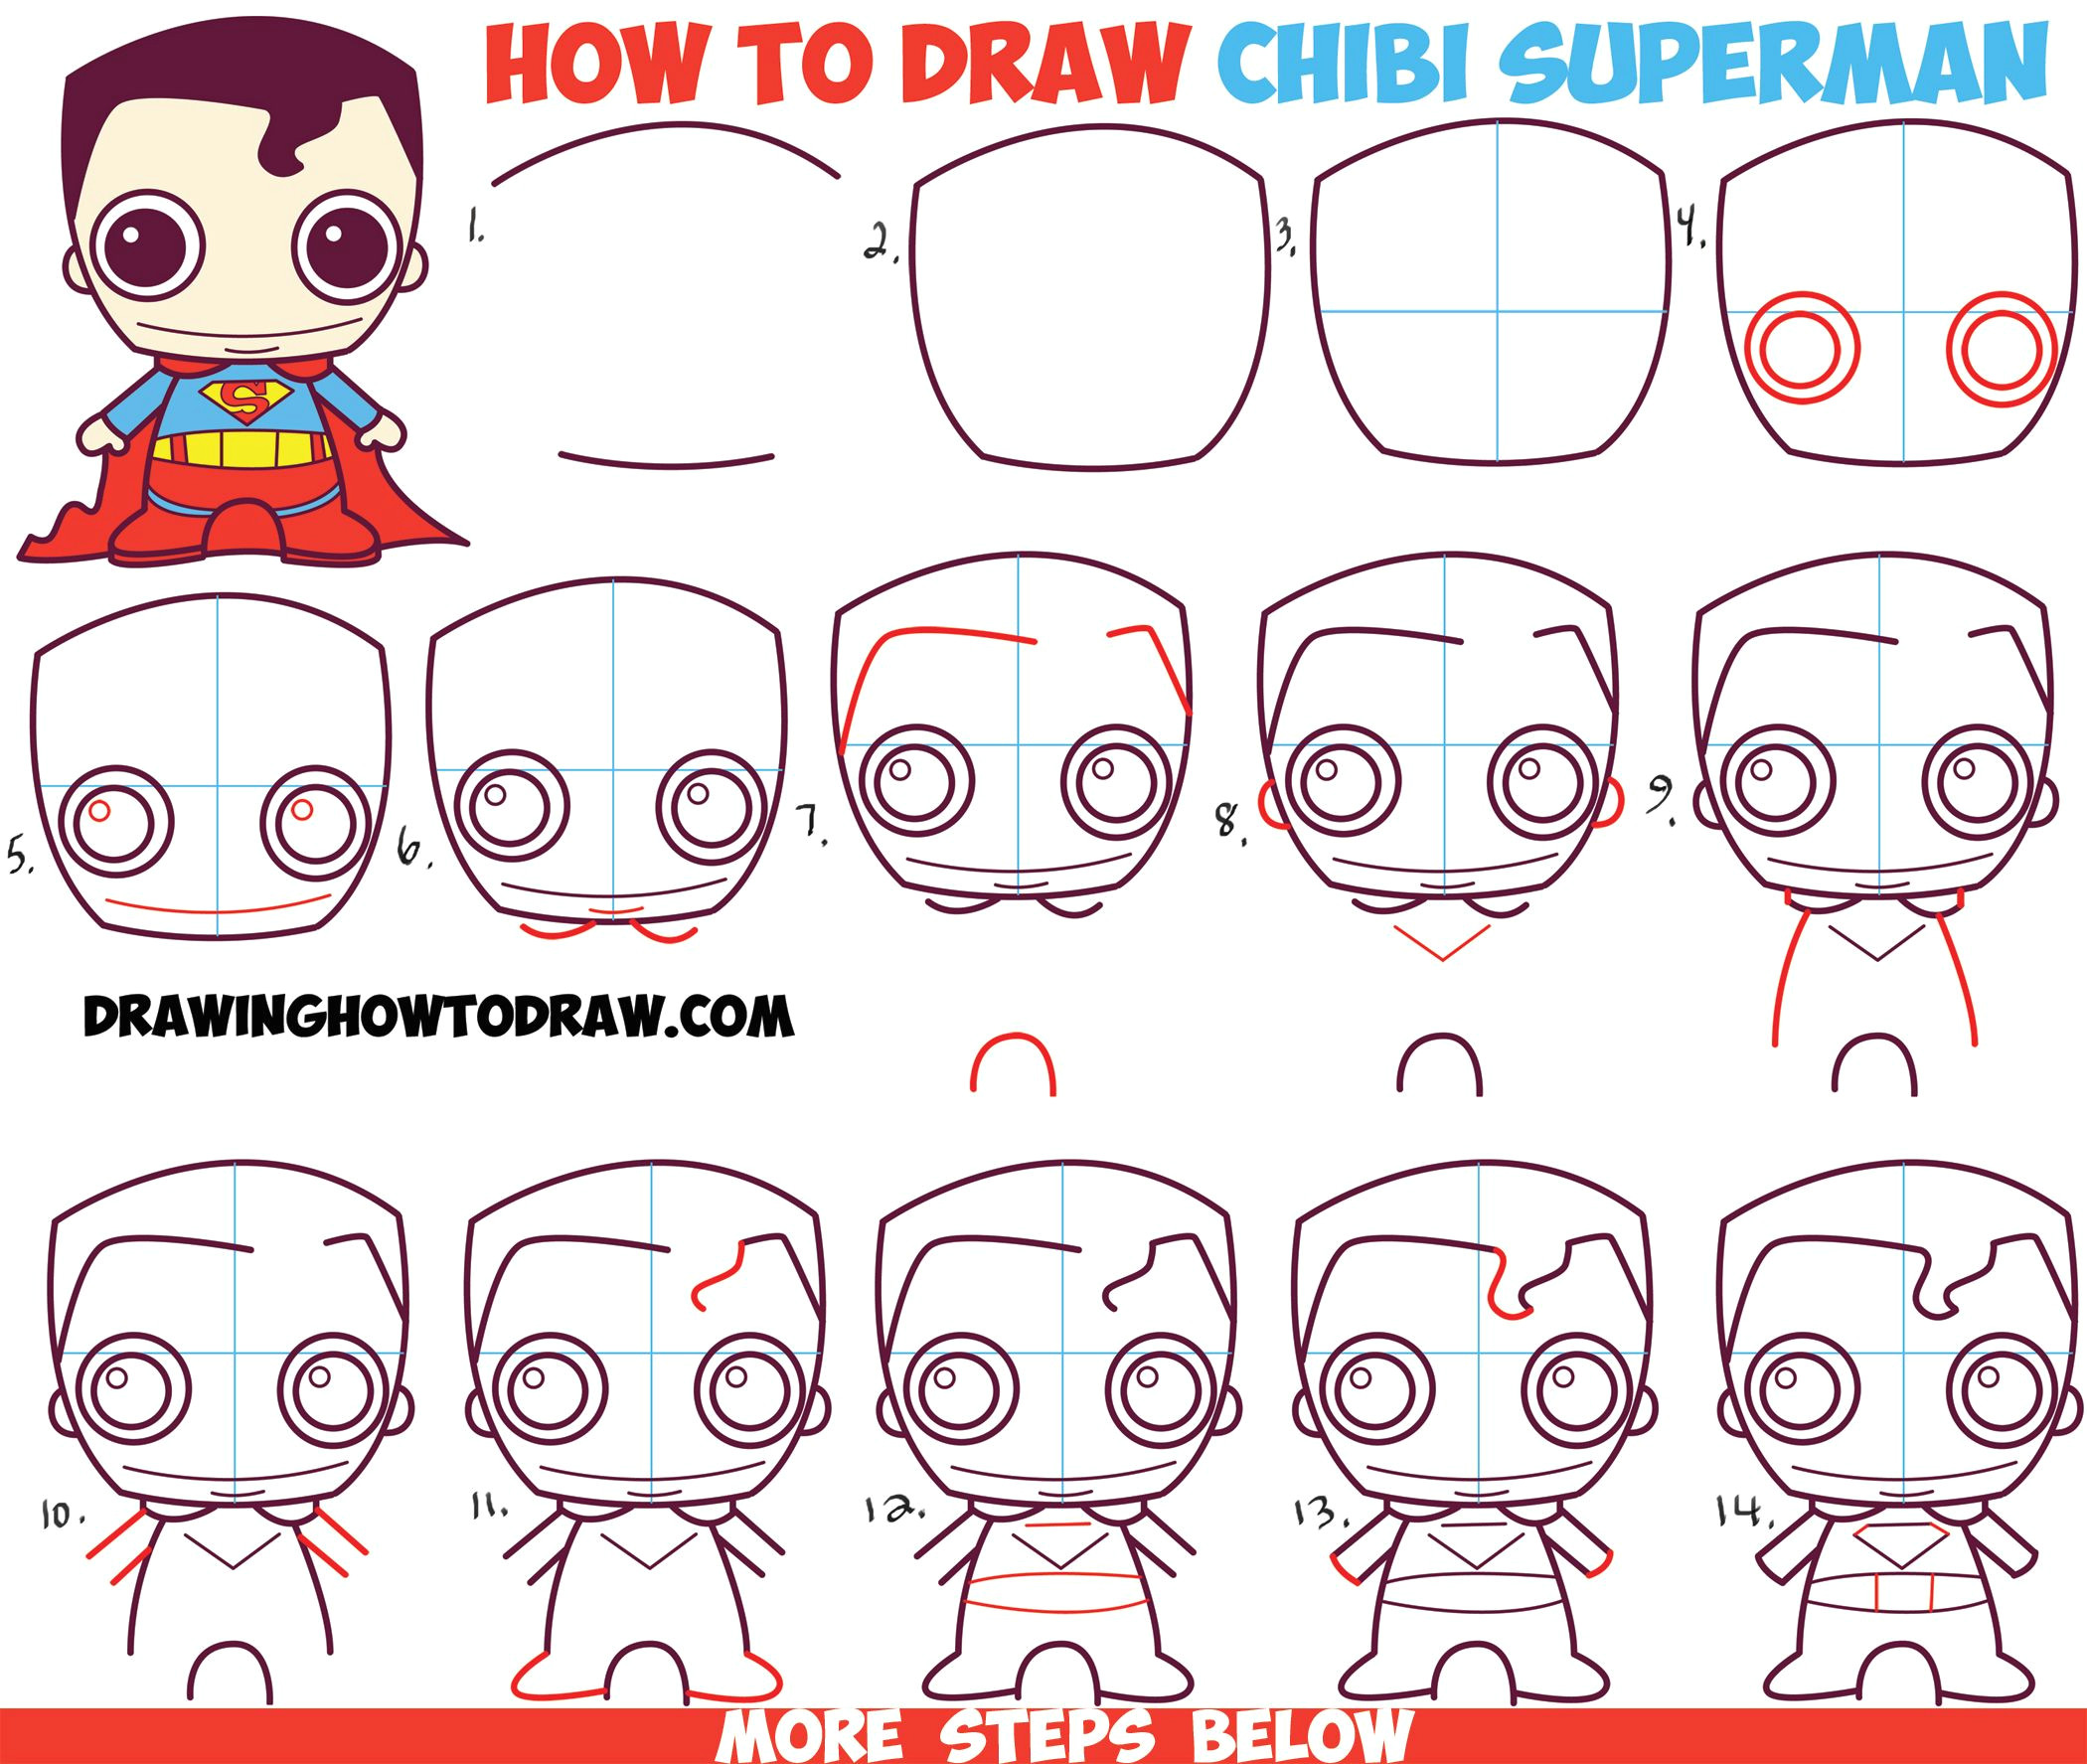 Drawings Easy Neon How to Draw Cute Chibi Superman From Dc Comics In Easy Step by Step